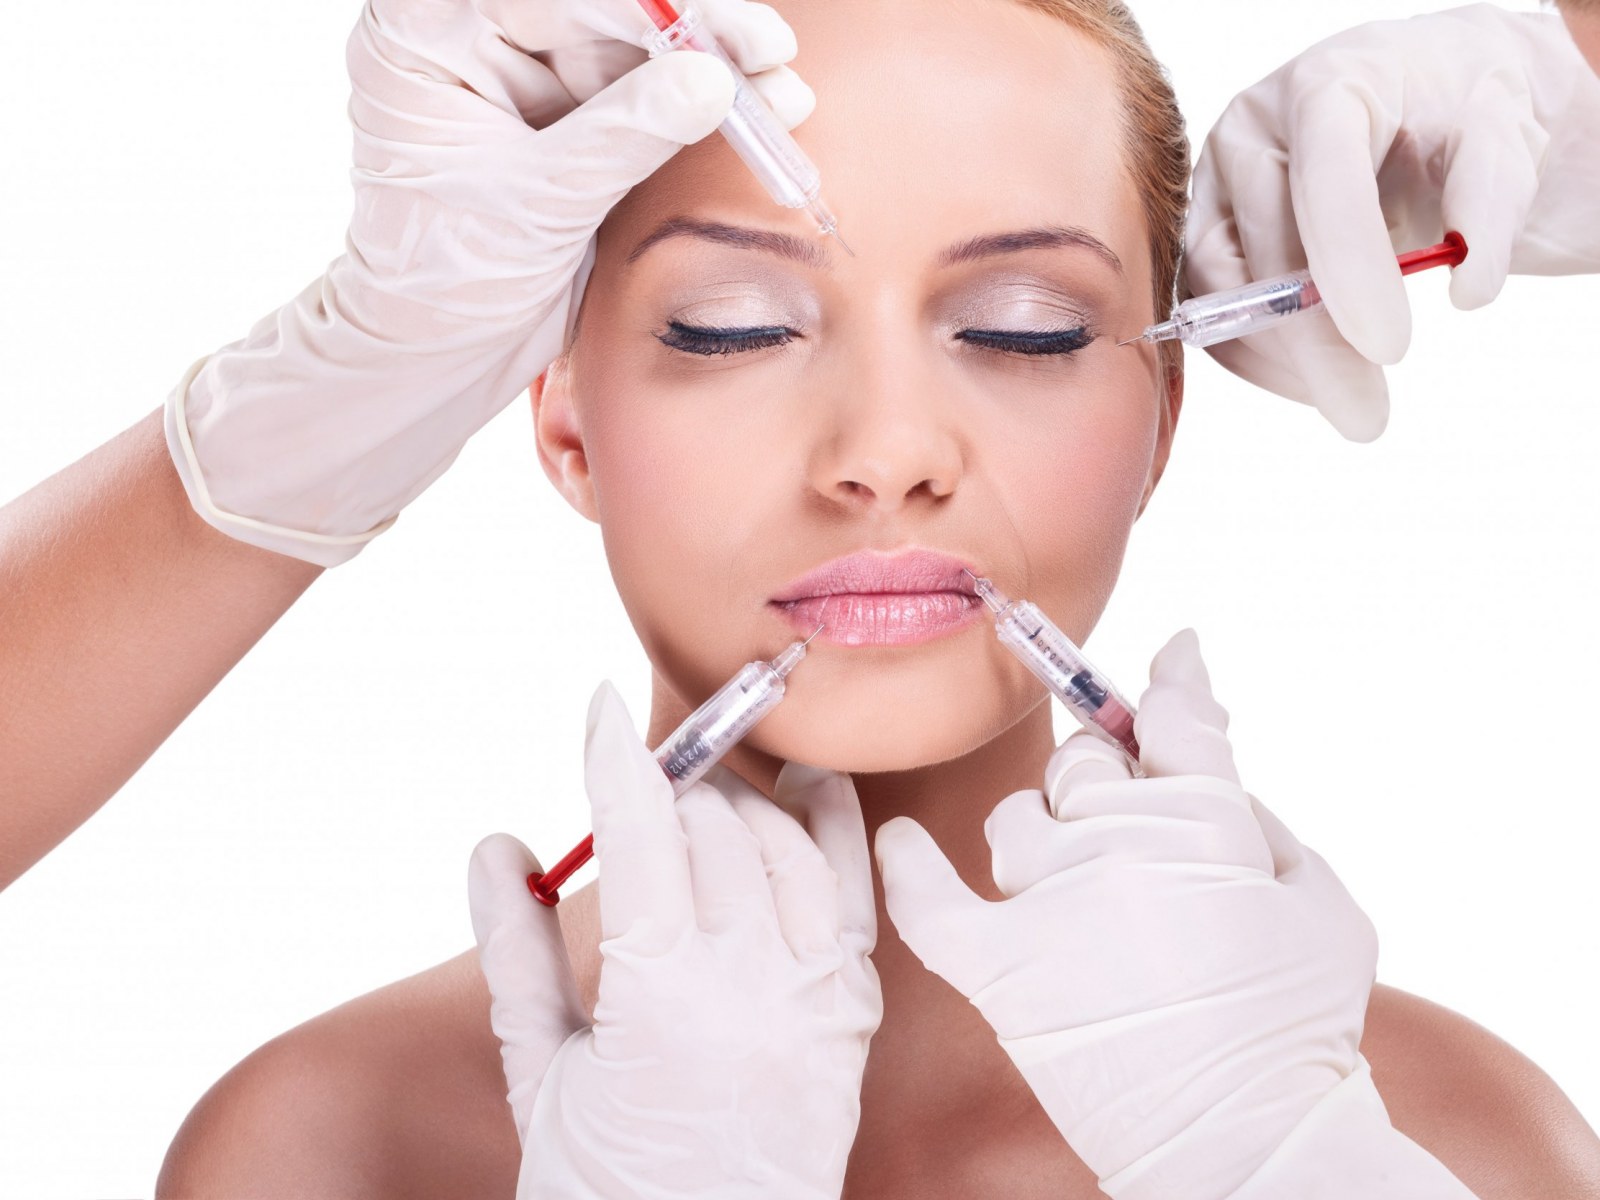 Botox: Its Usage, Benefits & More | About Face Anti Aging